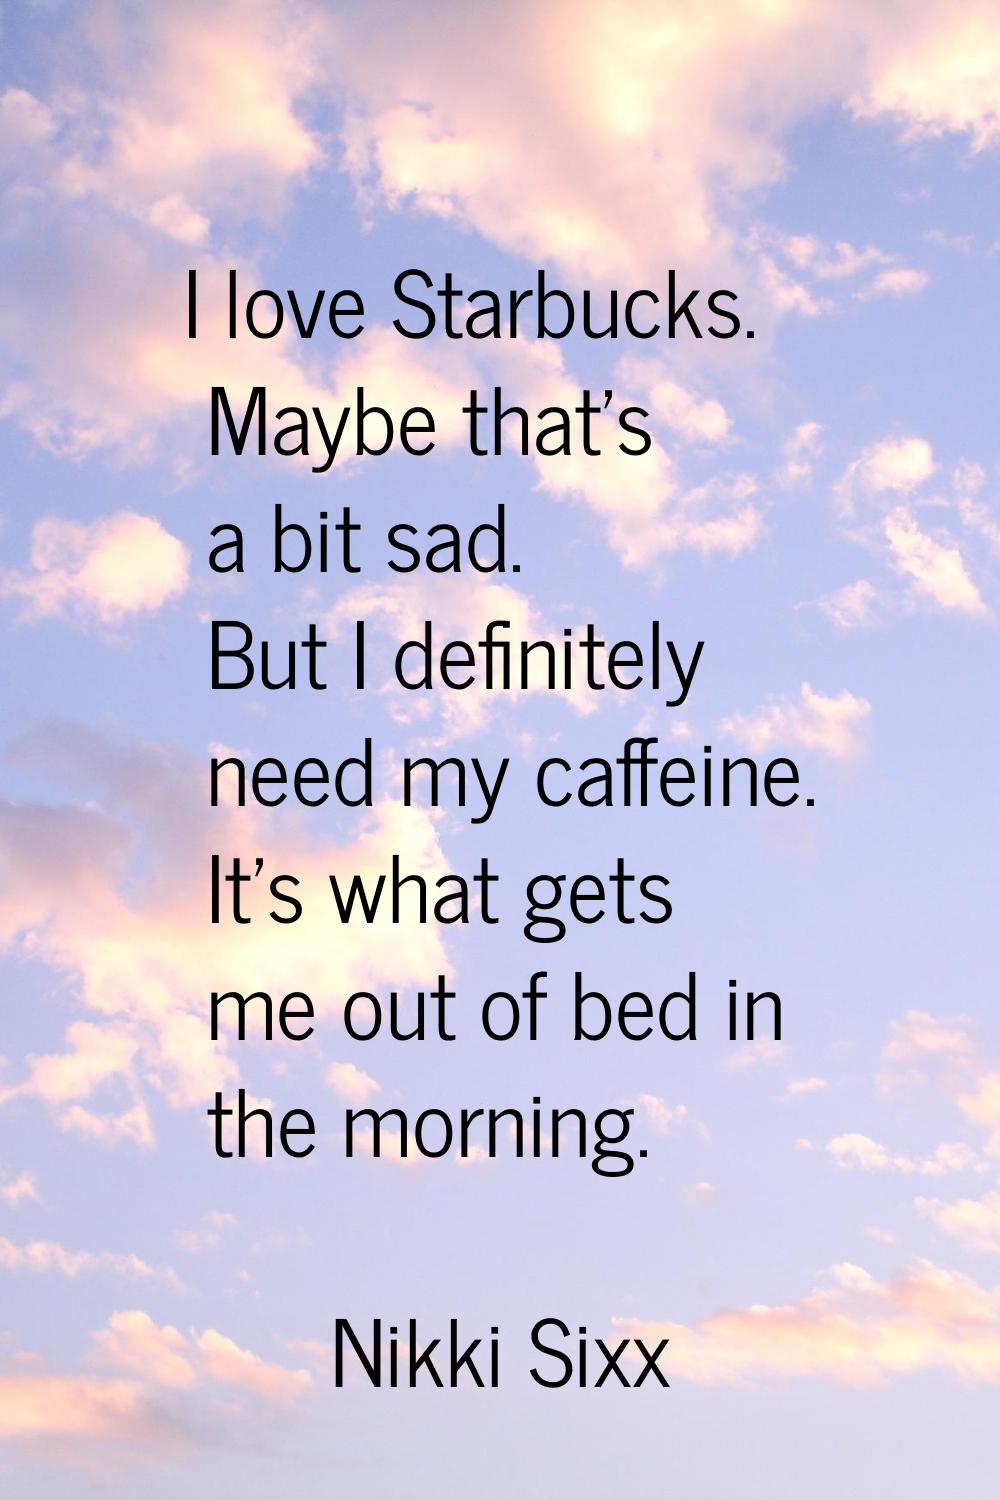 I love Starbucks. Maybe that's a bit sad. But I definitely need my caffeine. It's what gets me out 